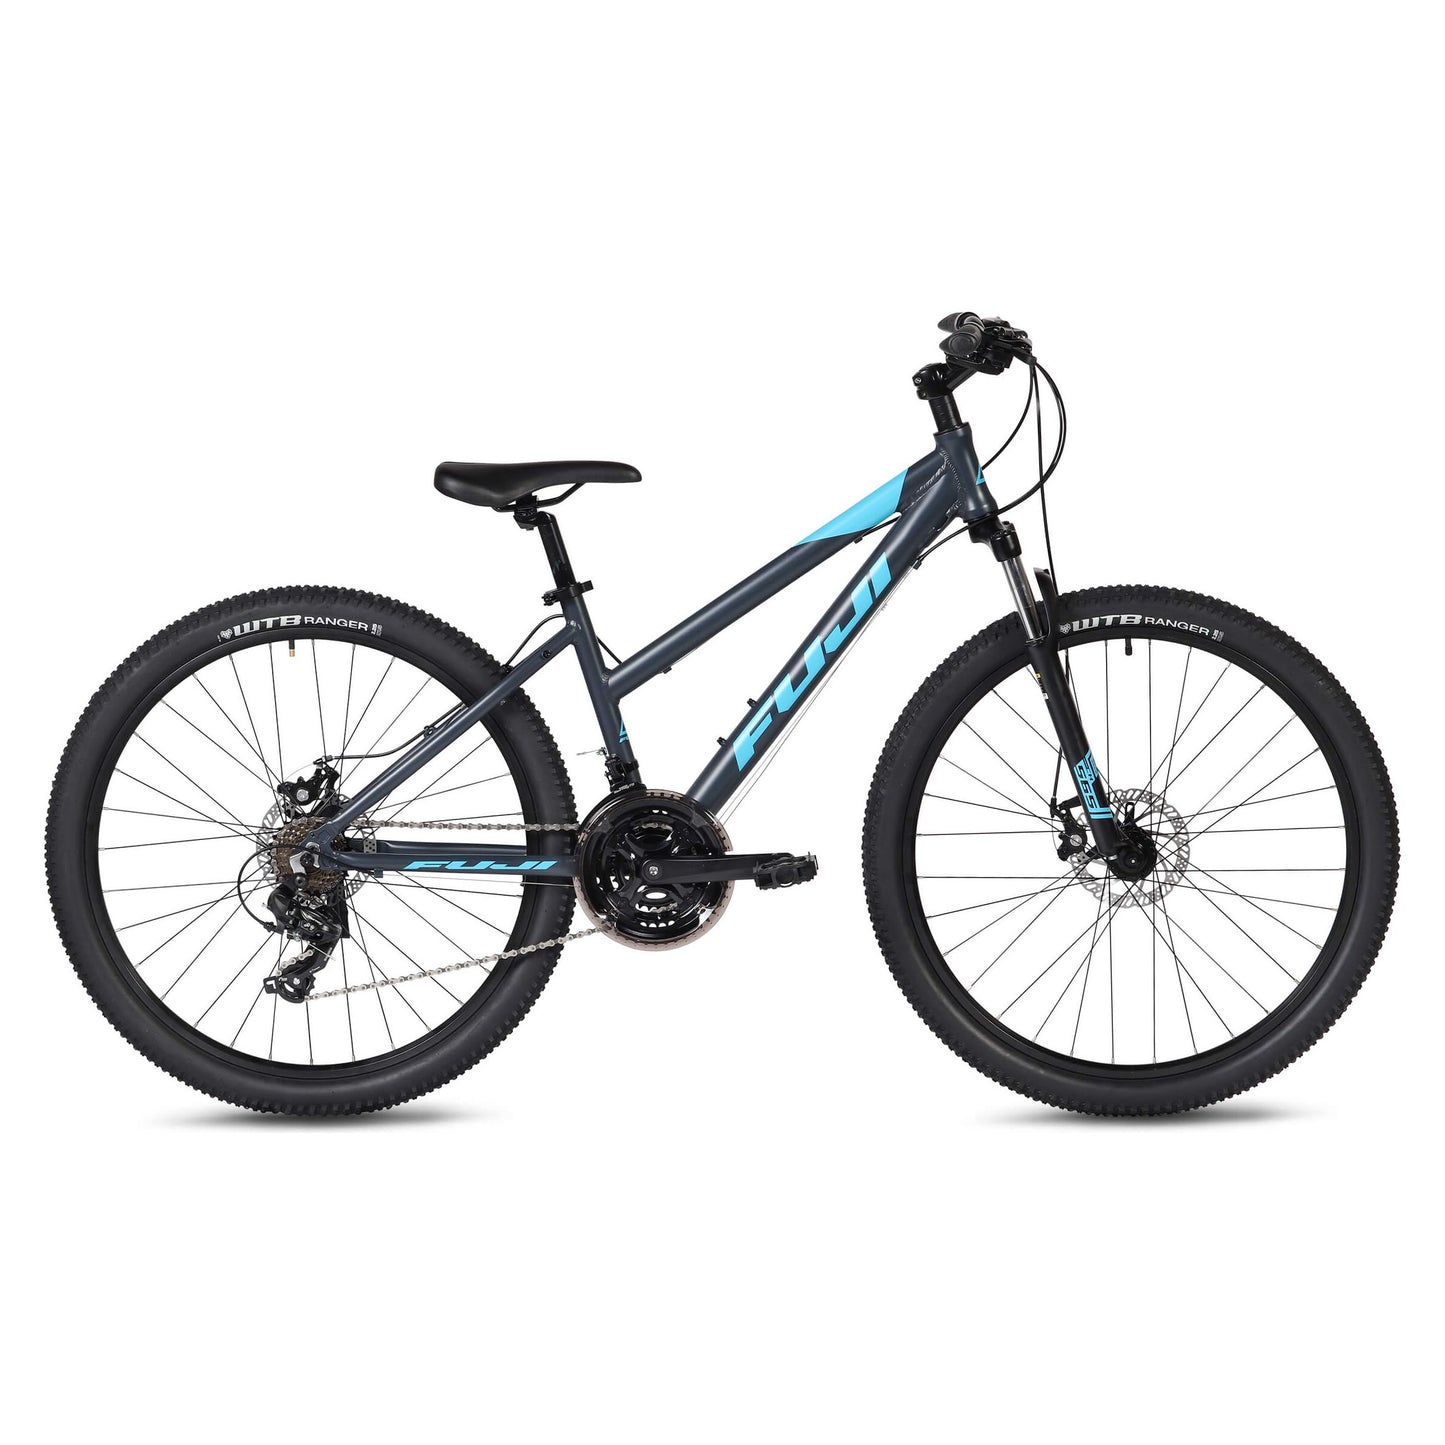 BIKE FUJI ADVENTURE 27.5 ST AVAILABLE IN STORE